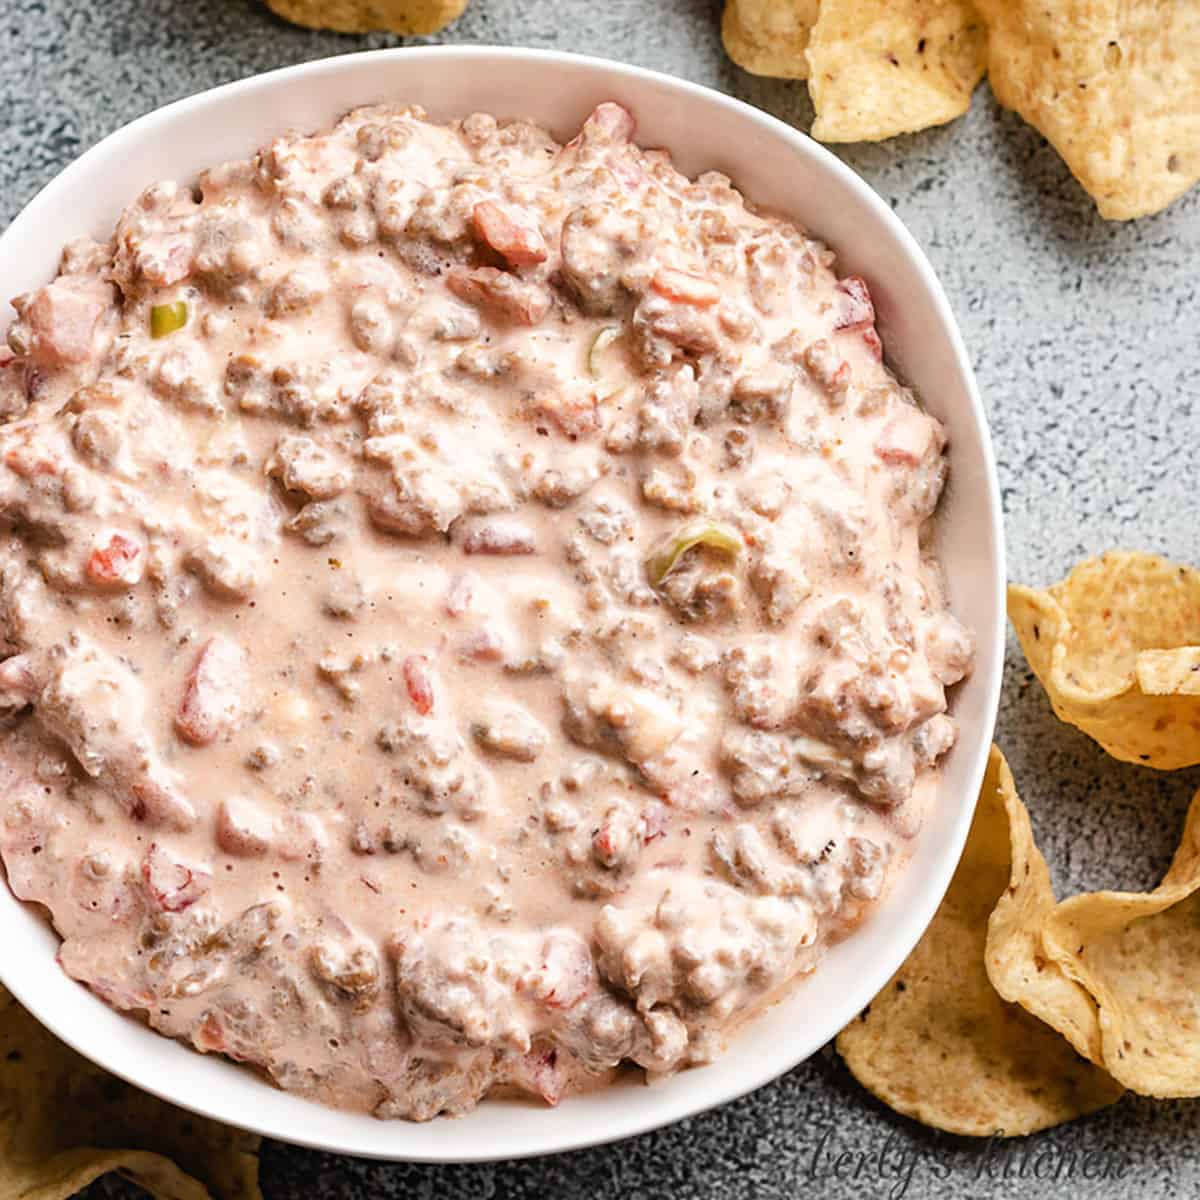 An aerial view of the Italian sausage dip with chips.